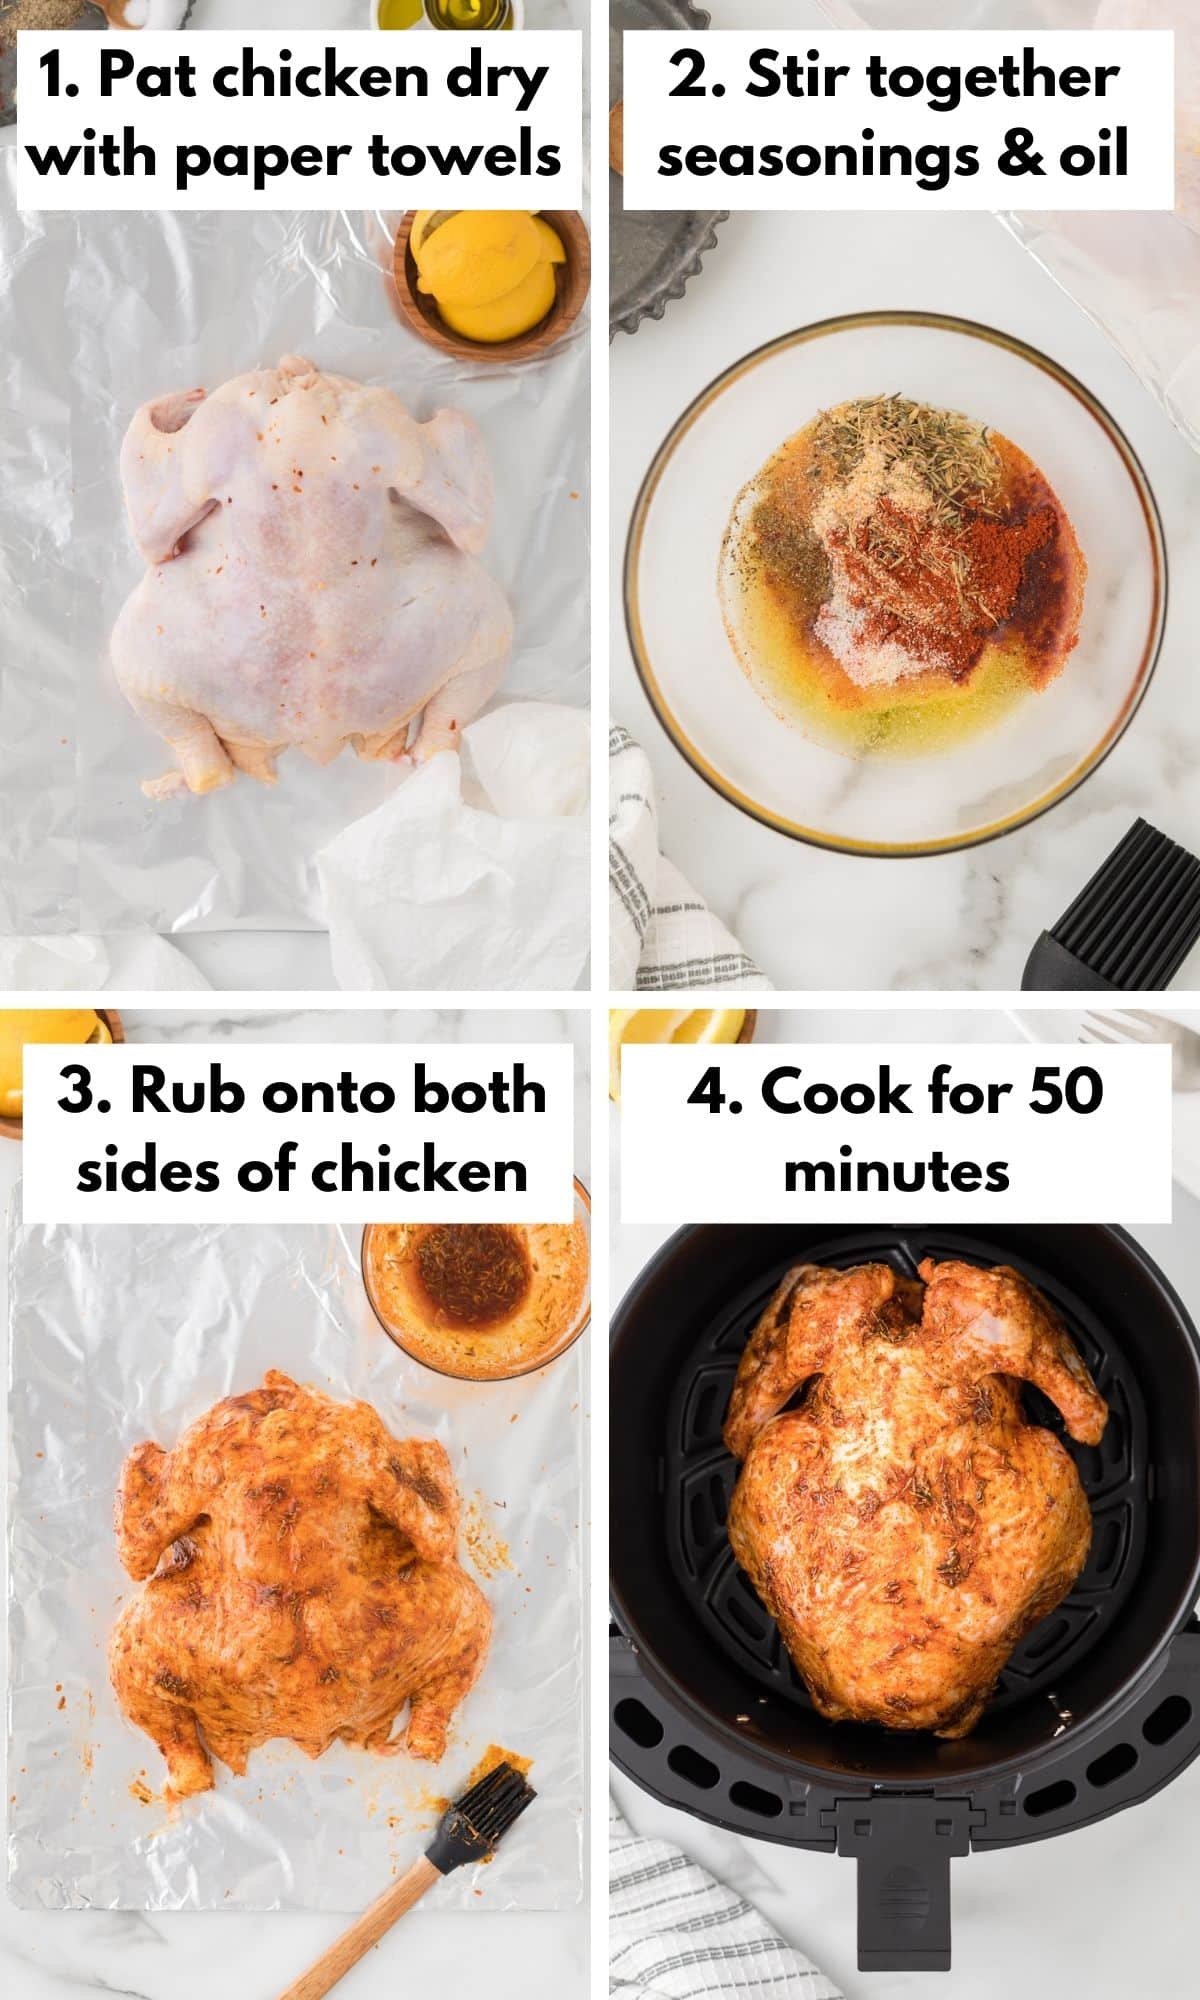 How to cook a chicken in an air fryer.